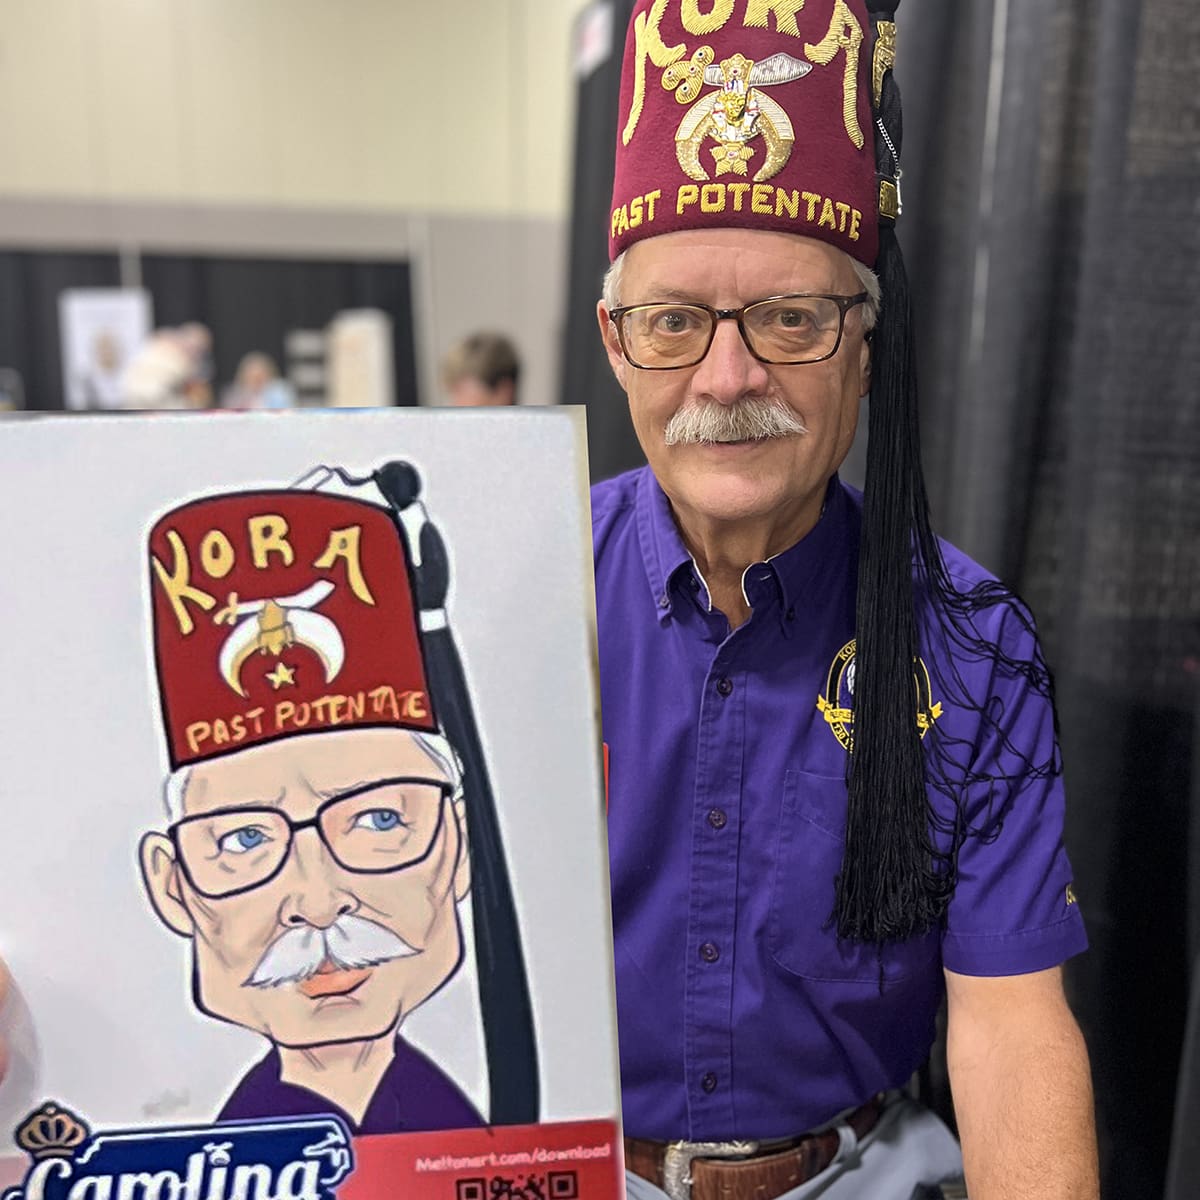 Older gentleman holding his prized caricature sketch at a trade show booth.